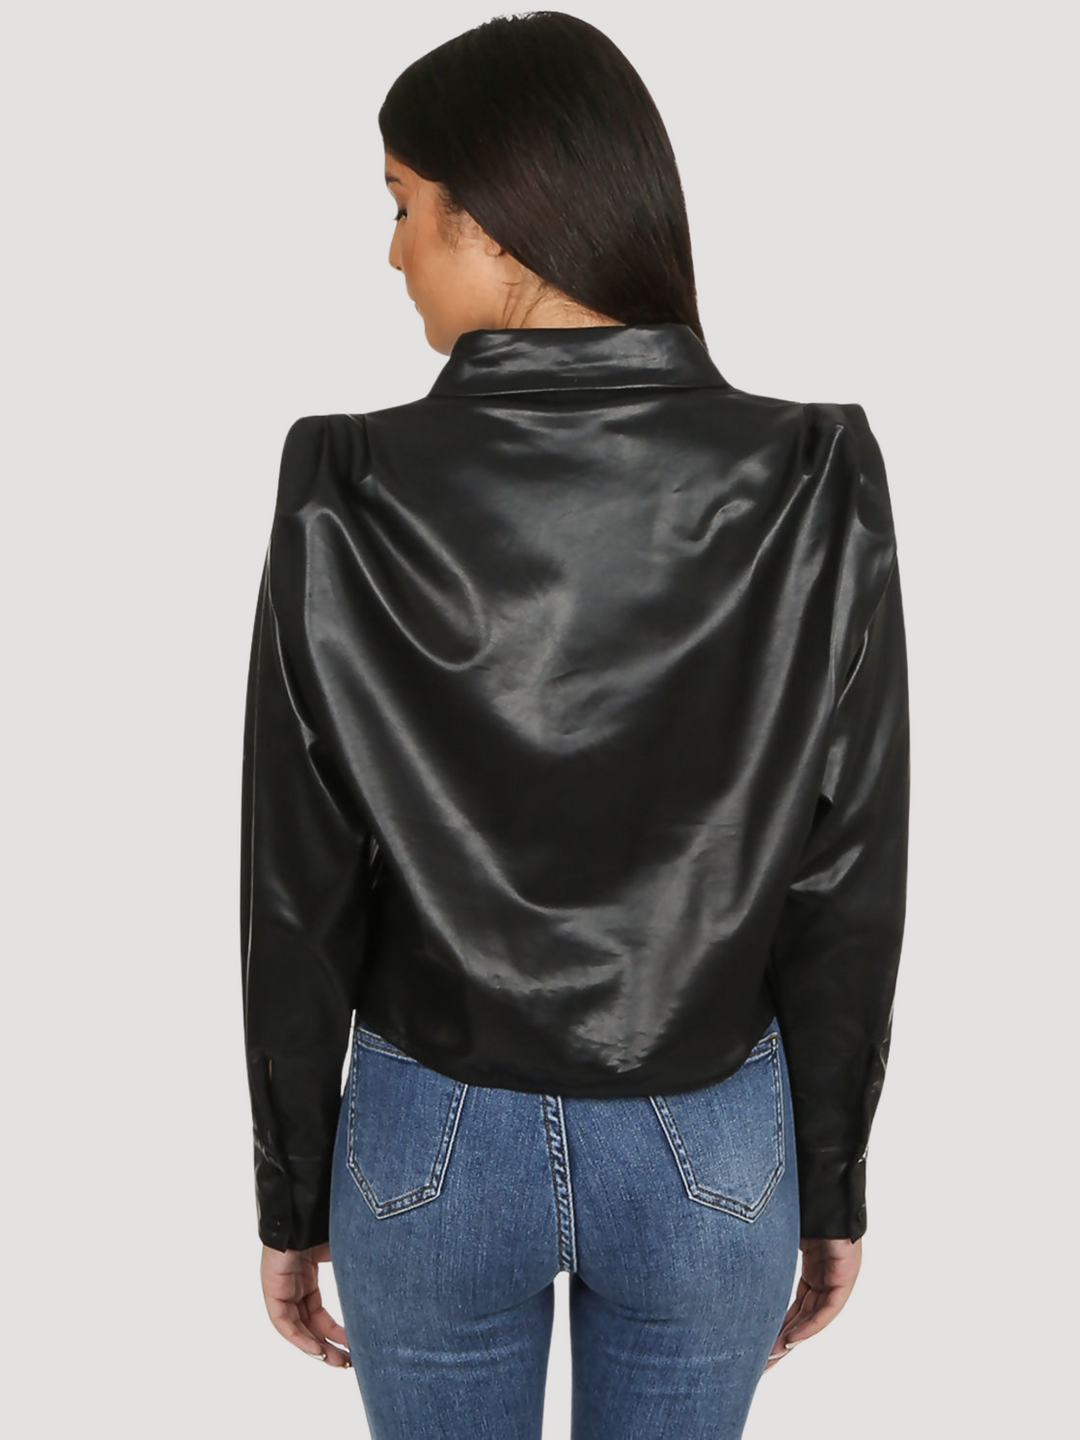 Model wears black faux leather shirt with pleated shoulders and long sleeve. The pu cropped front button shirt and collard neck. Model stands with her back to the camera. The back of the cropped pu leather shirt, the pleated puff shoulders are visible.